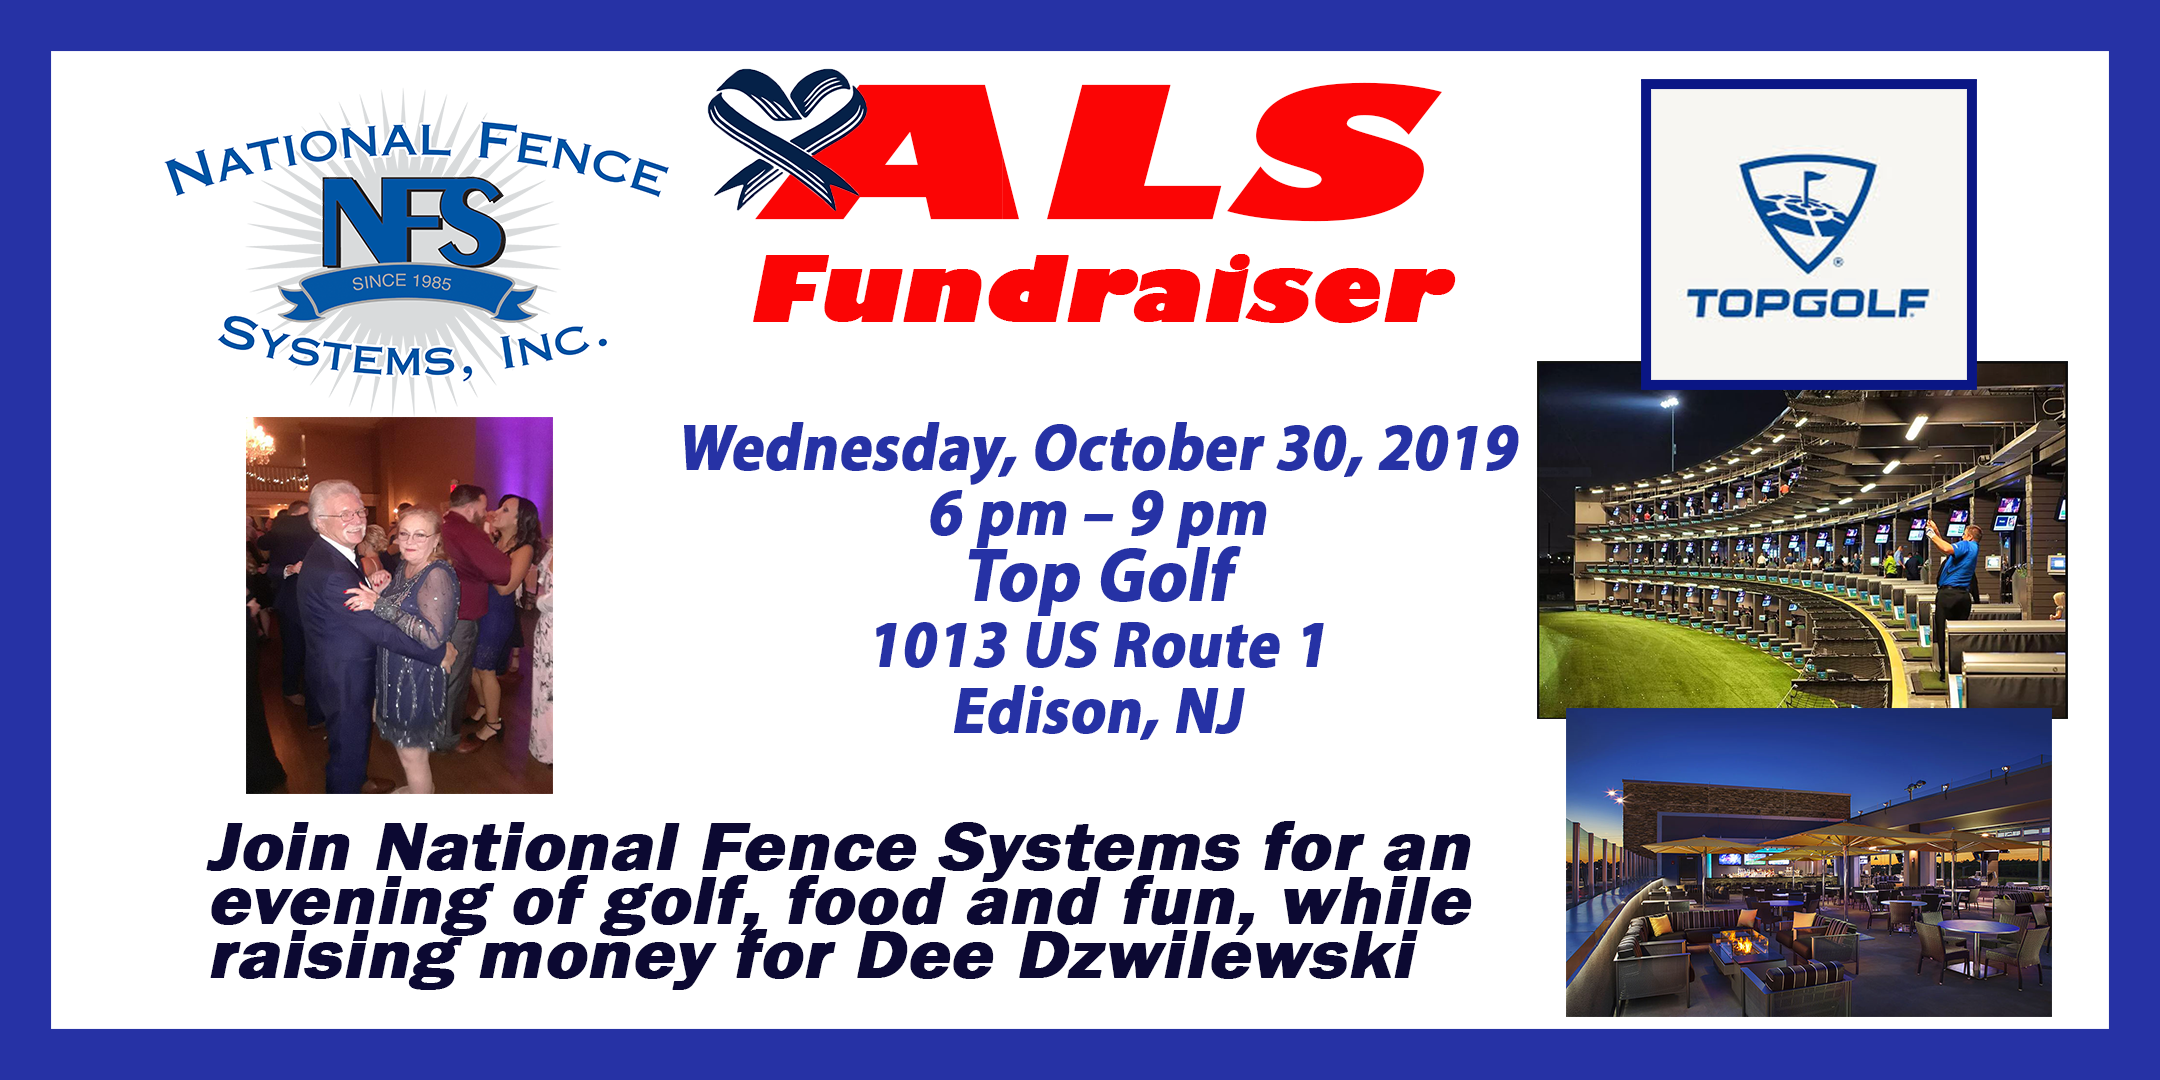 ALS Fundraiser for Dee Dzwilewski at Top Golf by National Fence Systems